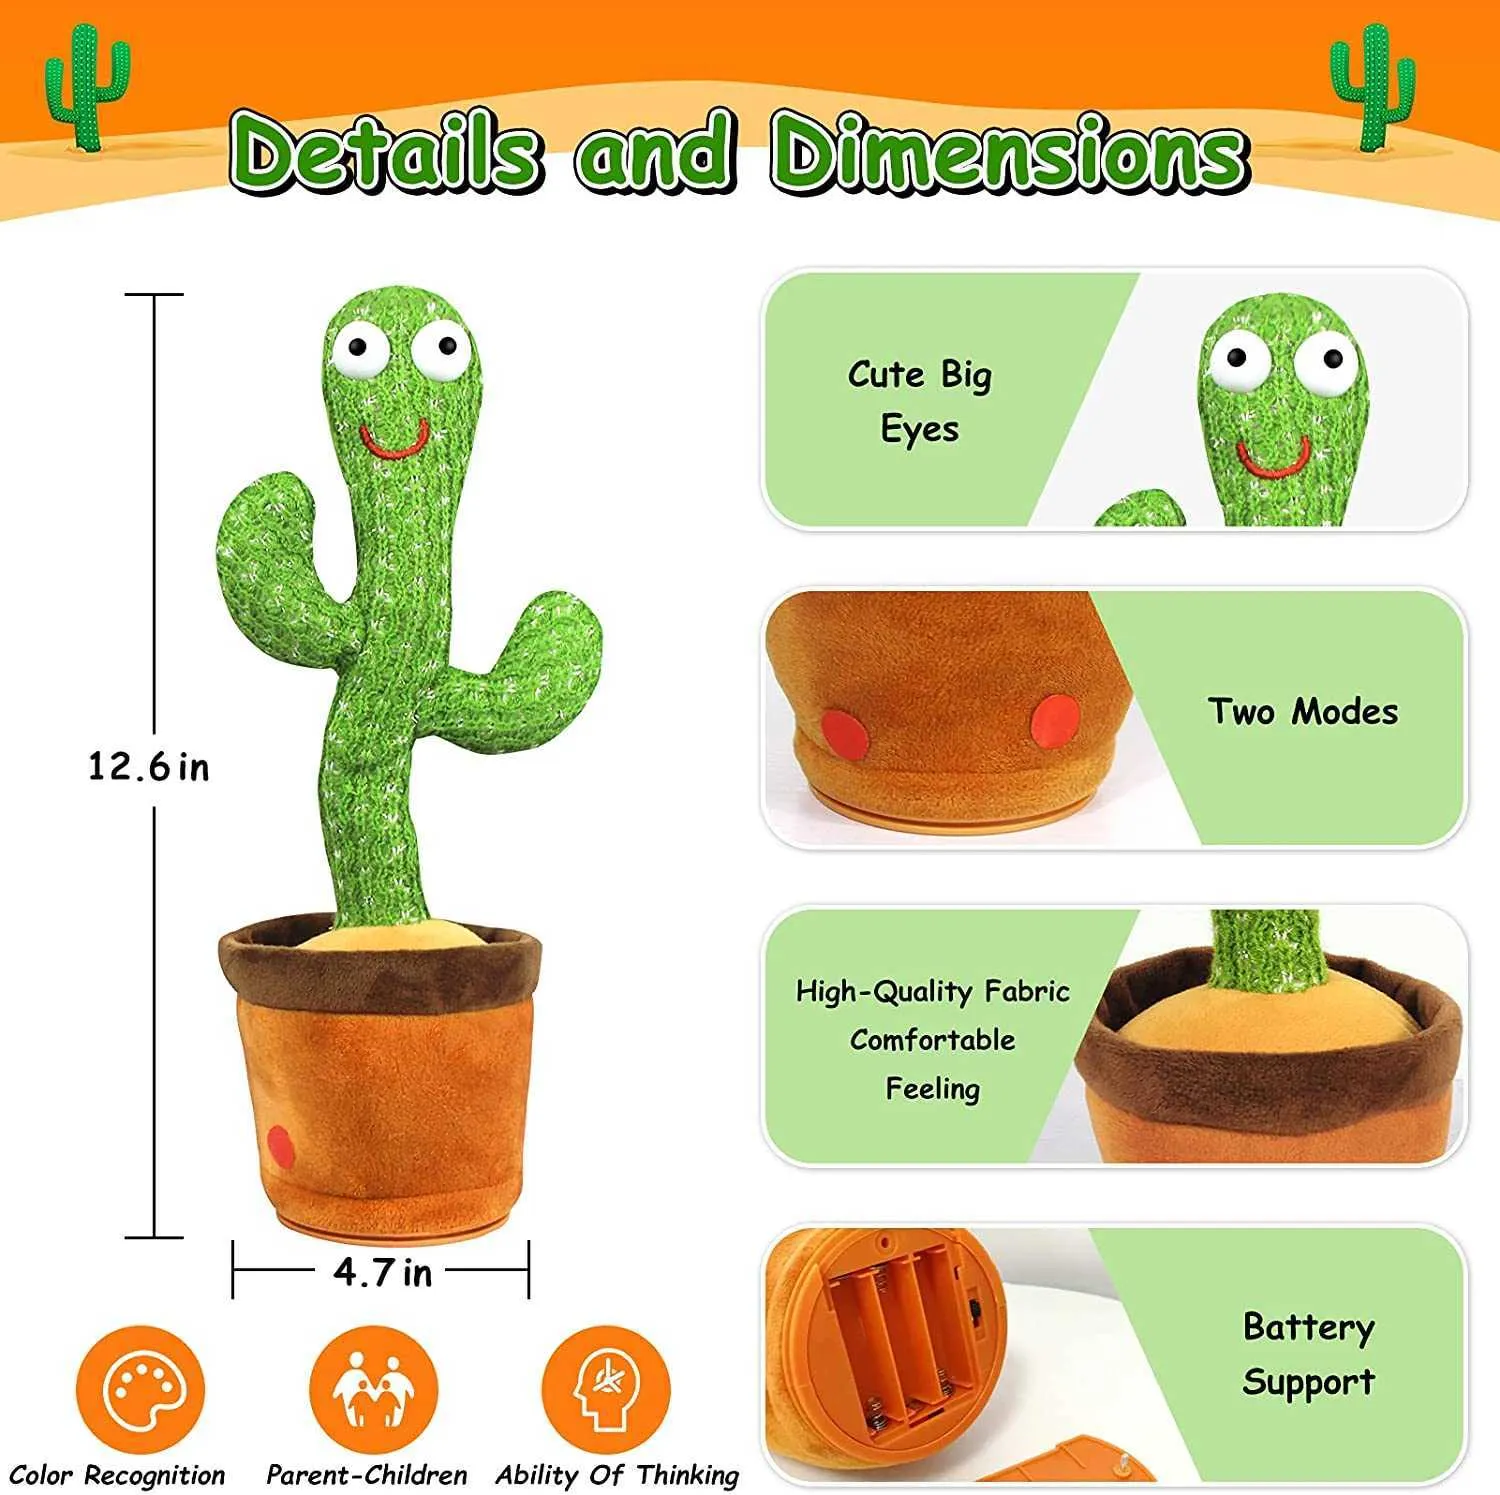 Härlig danskaktus Talking Sing Sound Record Repeat Kawaii Cactus Toys for Children Christmas Gifts Home Office Decoration 21107373610